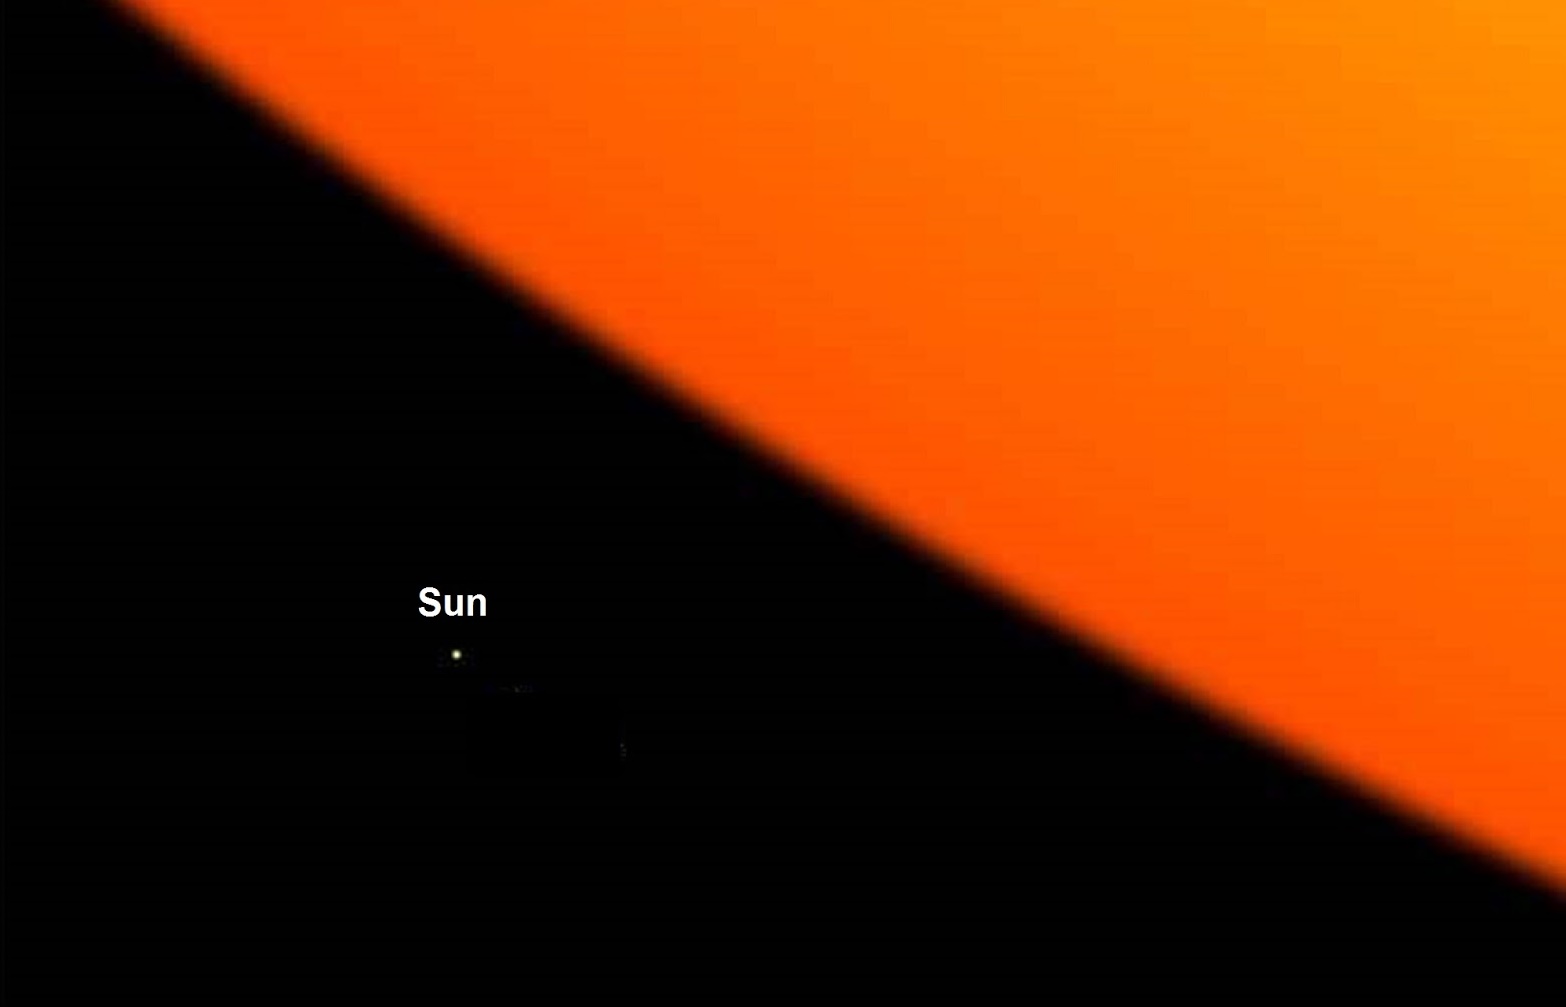 largest star in the universe compared to the sun